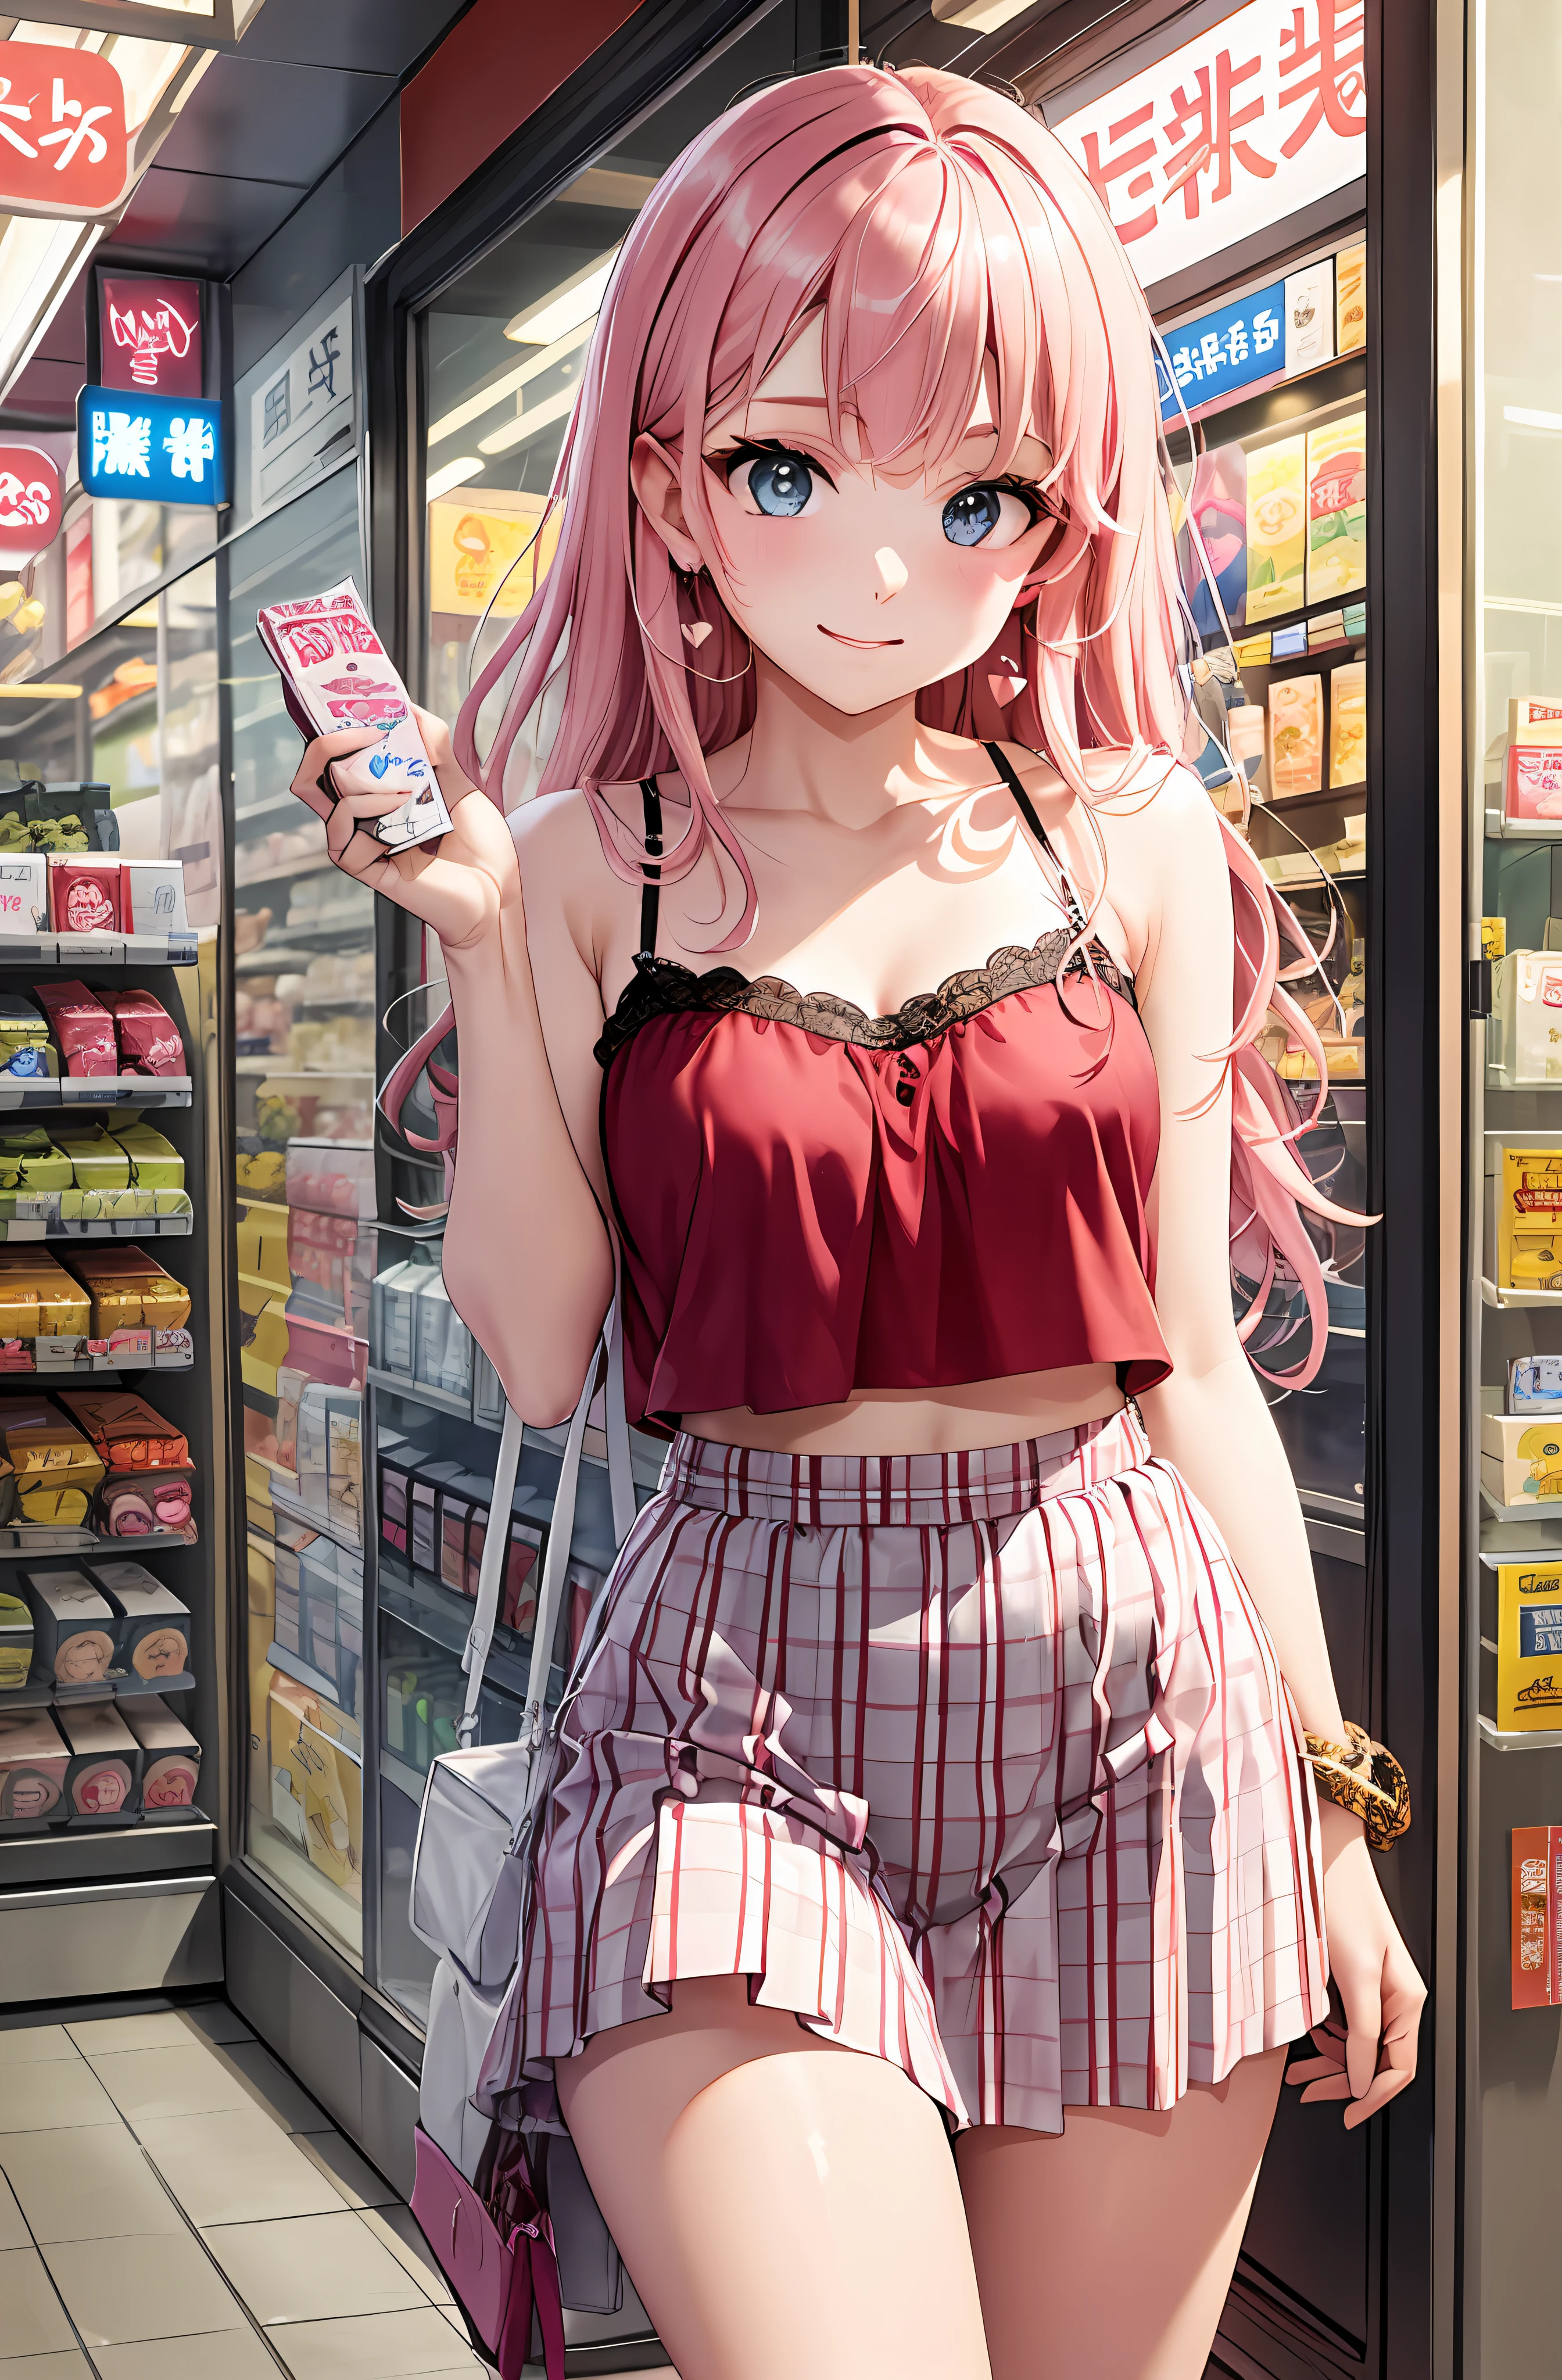 Portrait Art 15。Pink hair。long hairs。preated skirt。Camisole。ear ring。Heart-shaped chest。Happy look。Inside a convenience store、Hachiko-mae in Shibuya。pantiy、Cute string panties